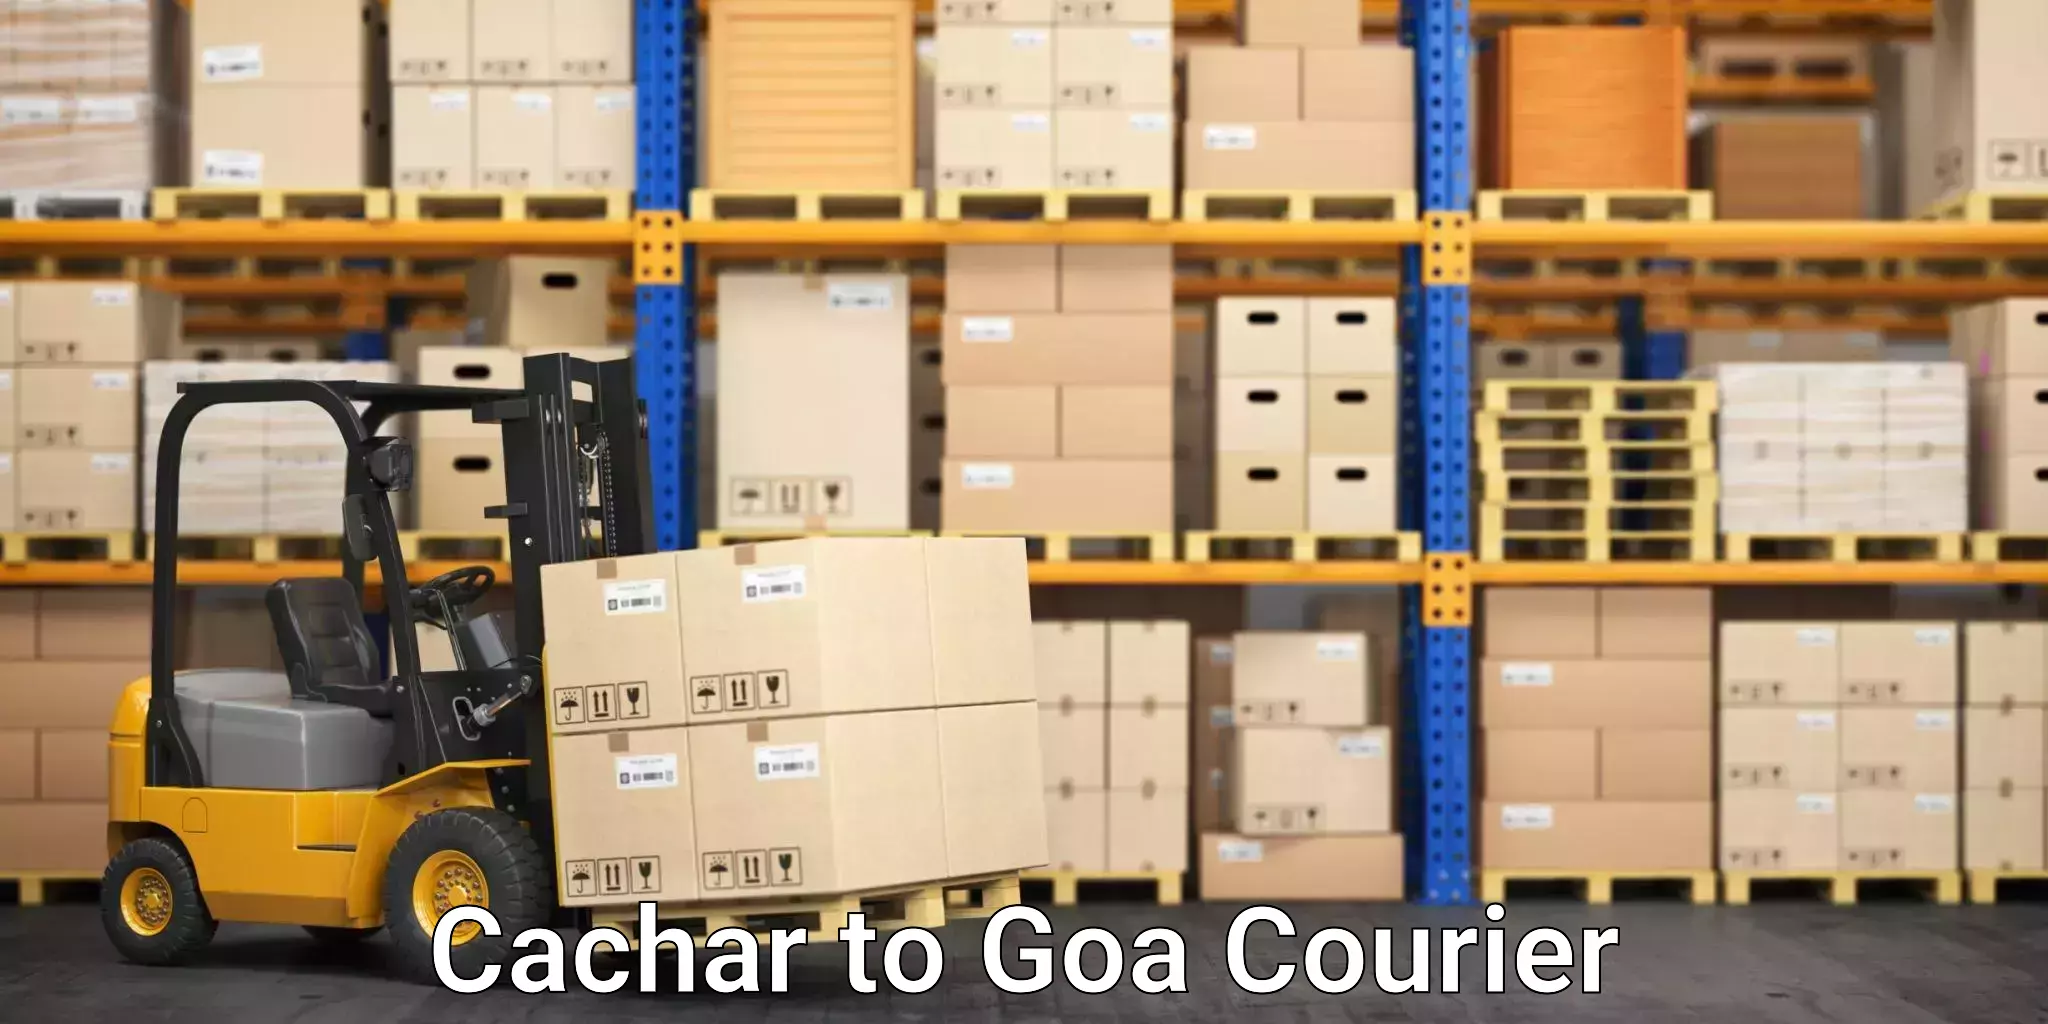 Express package delivery Cachar to Goa